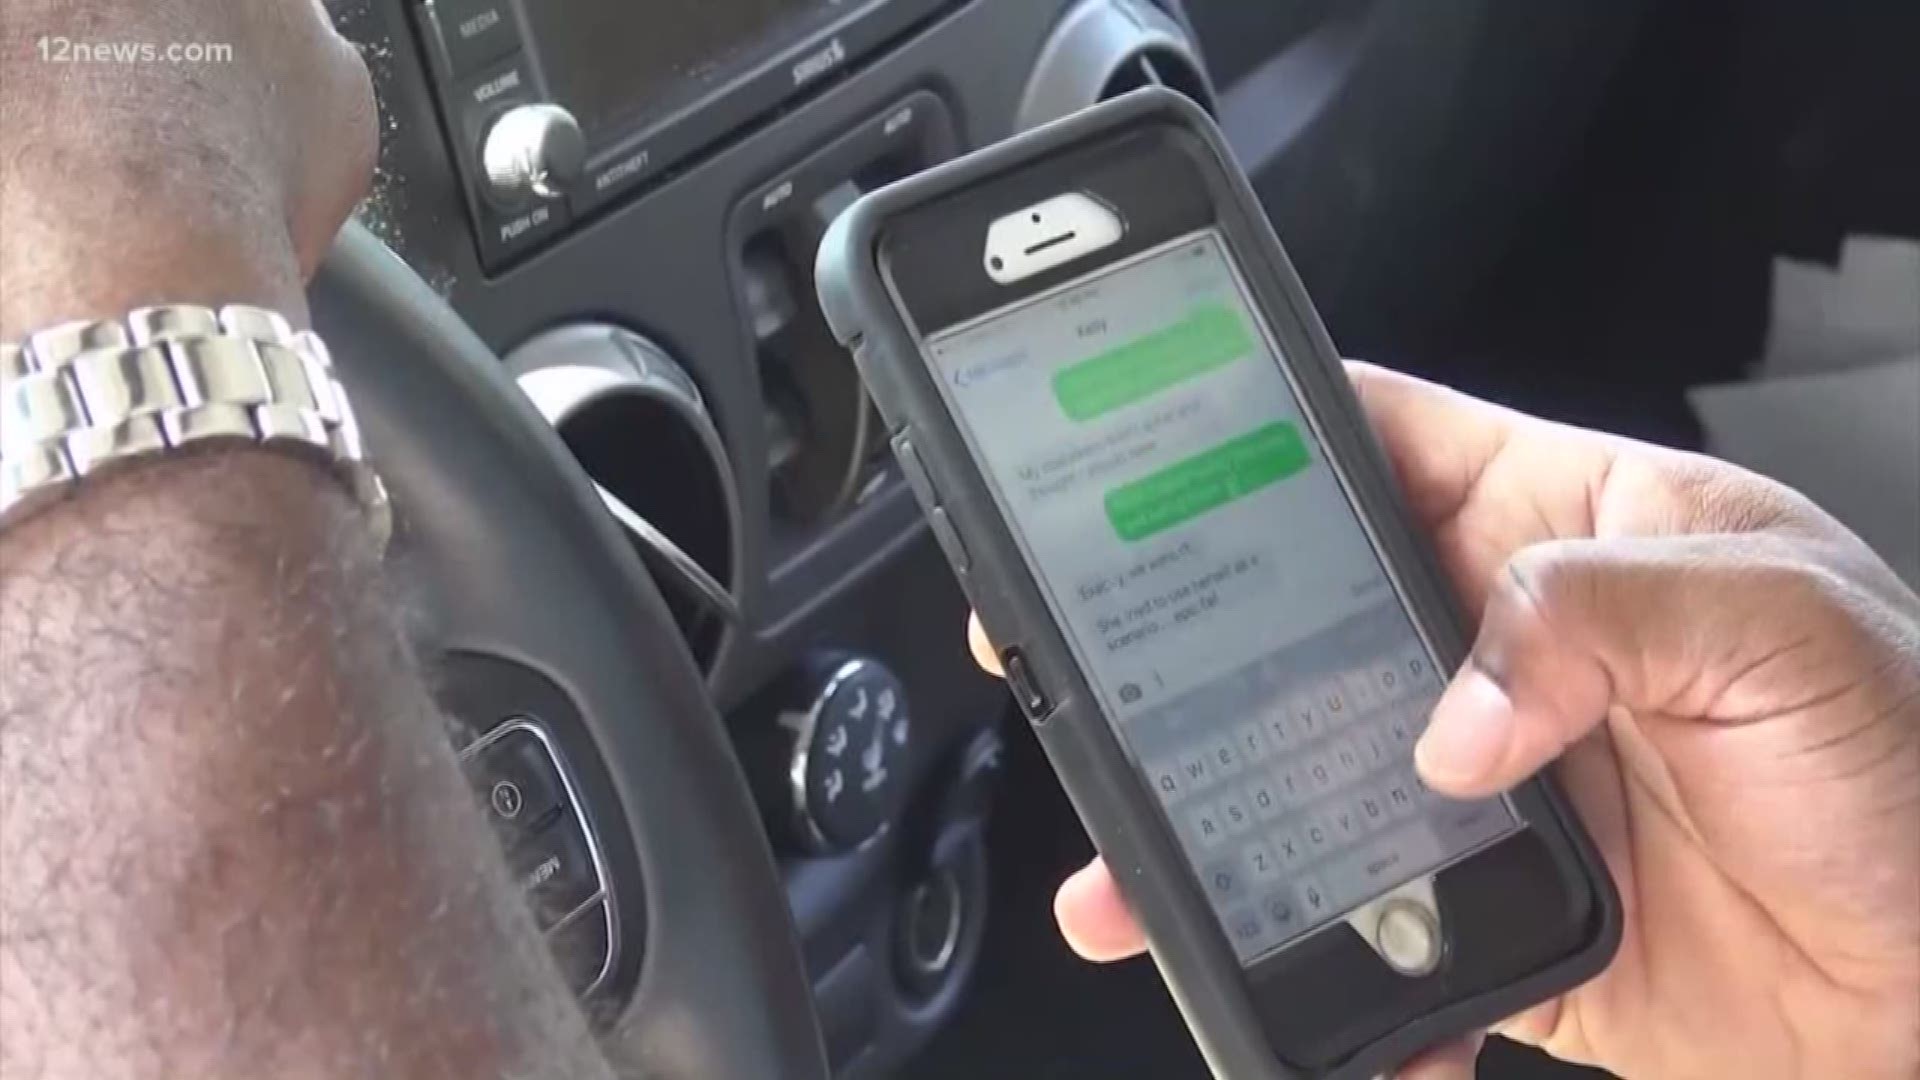 Arizona lawmakers have signed a bill that bans texting and driving across the state. The law is headed to Governor Doug Ducey to sign.